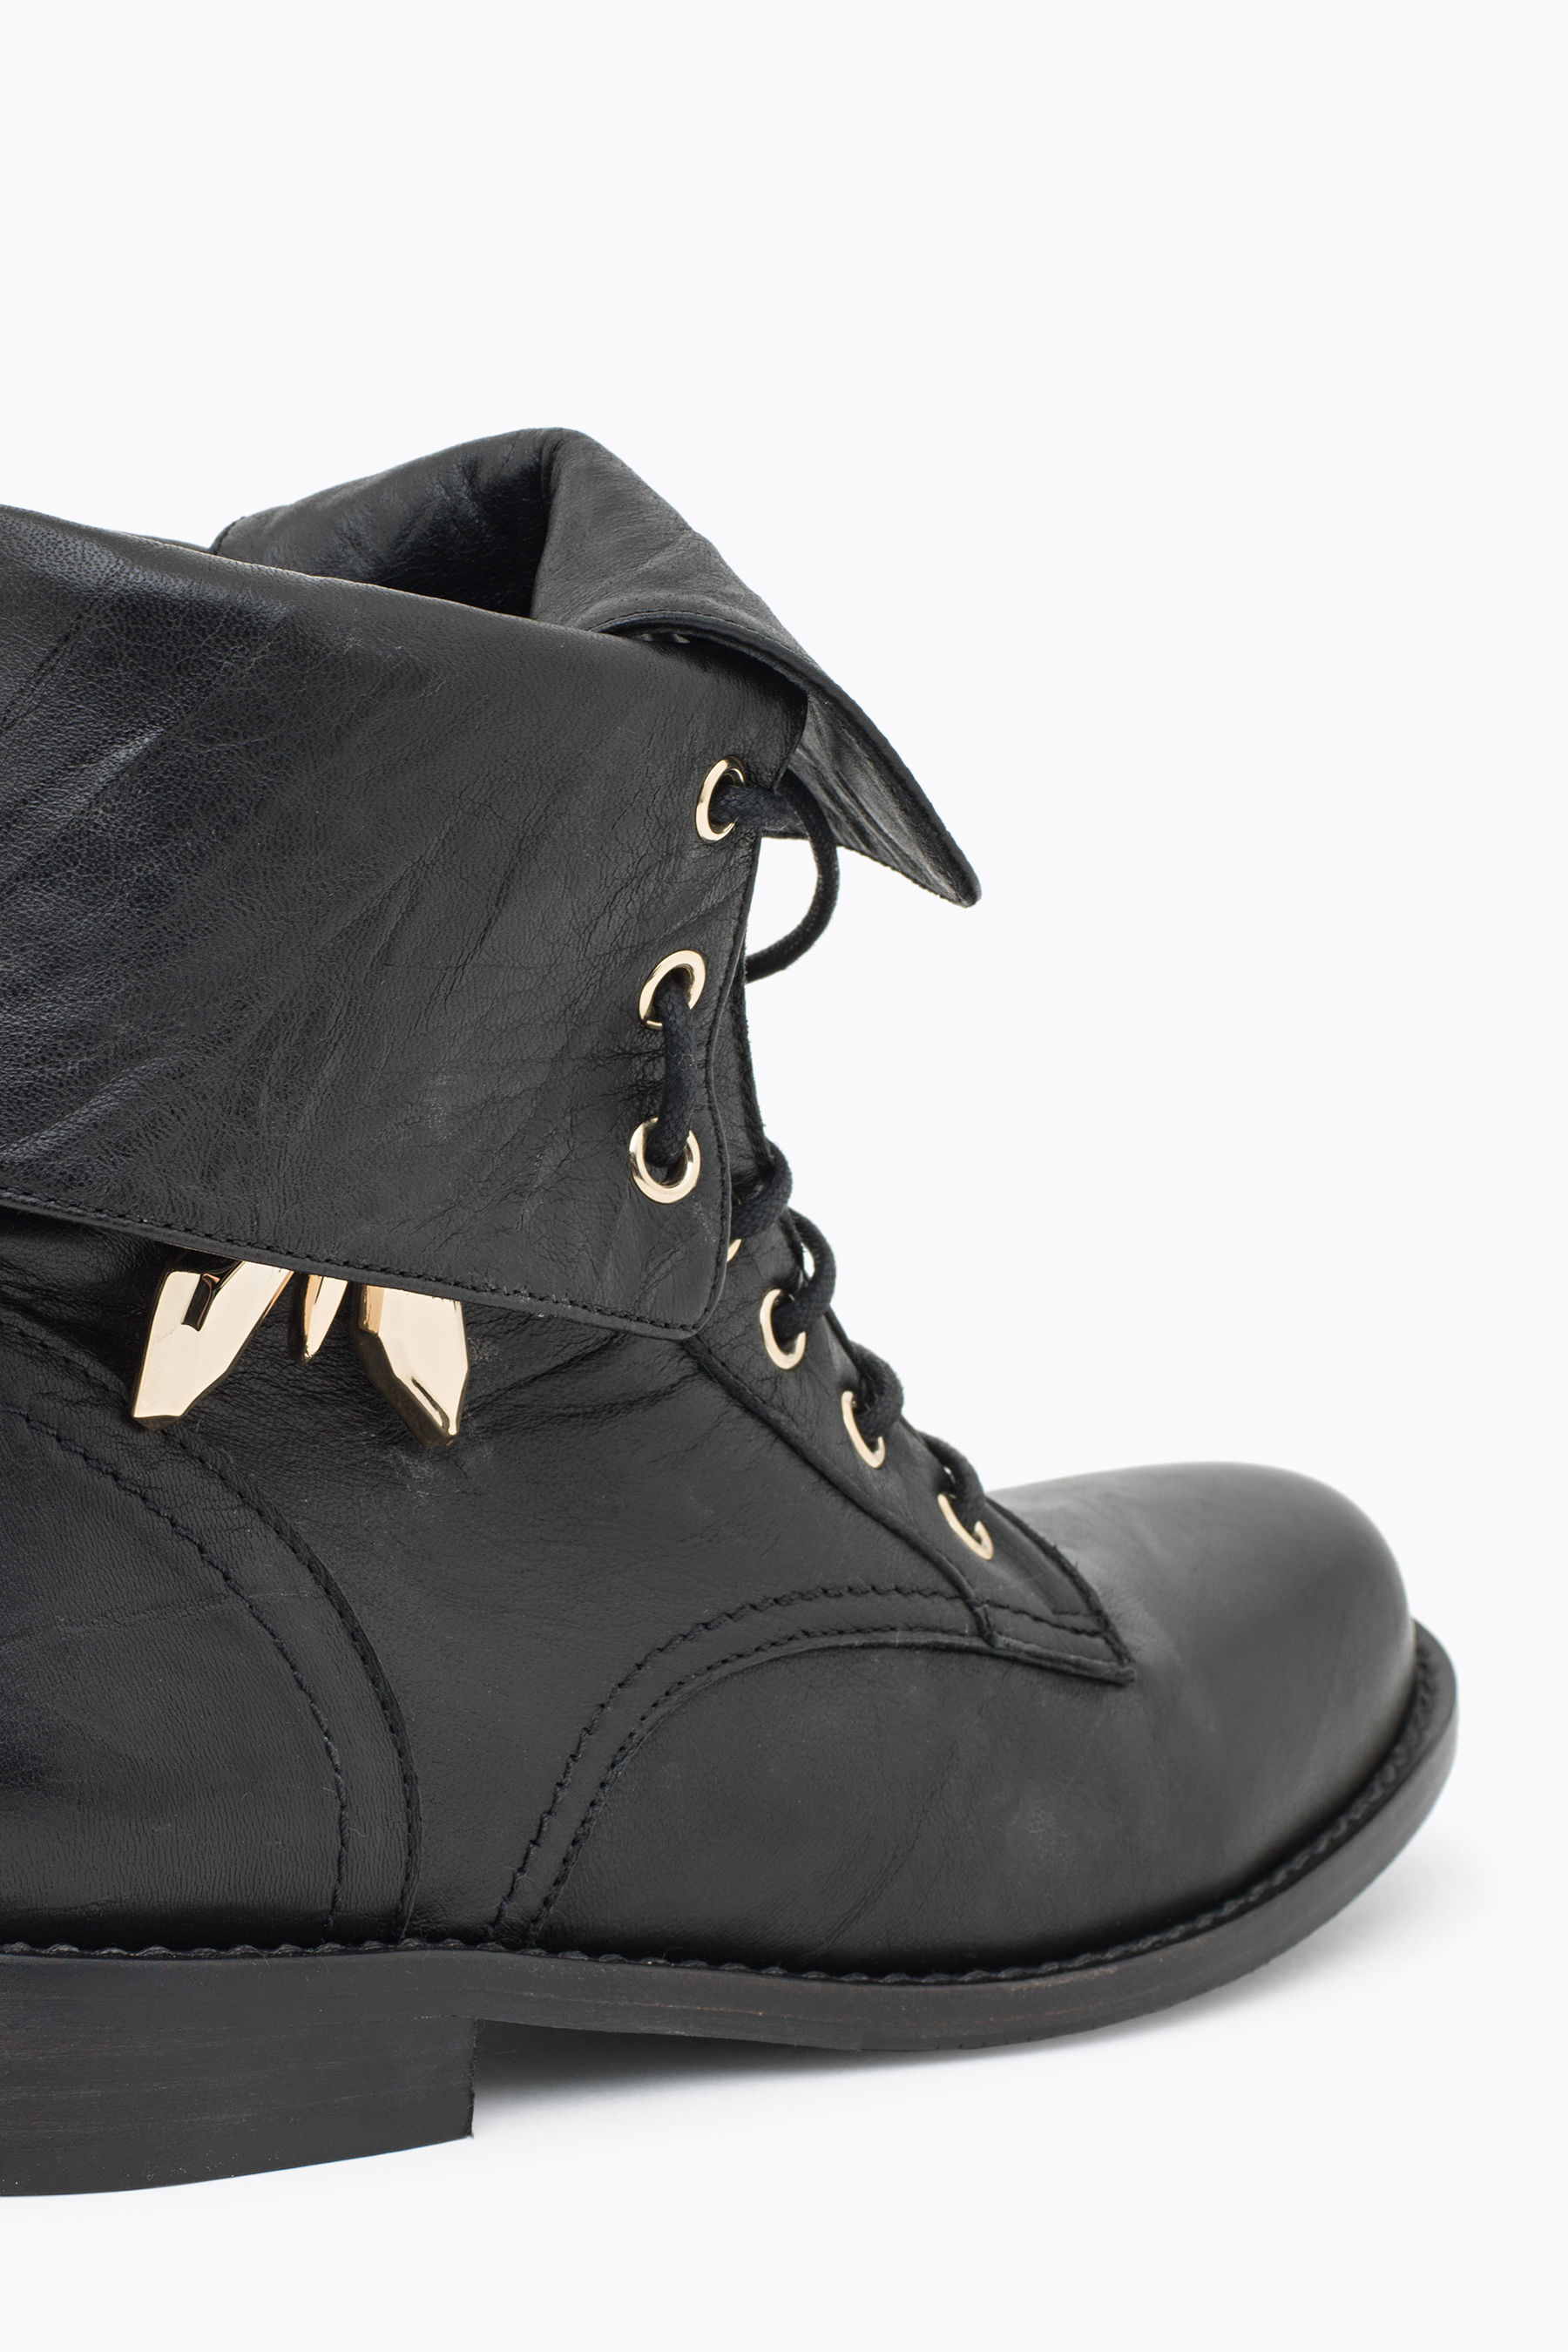 leather biker boots